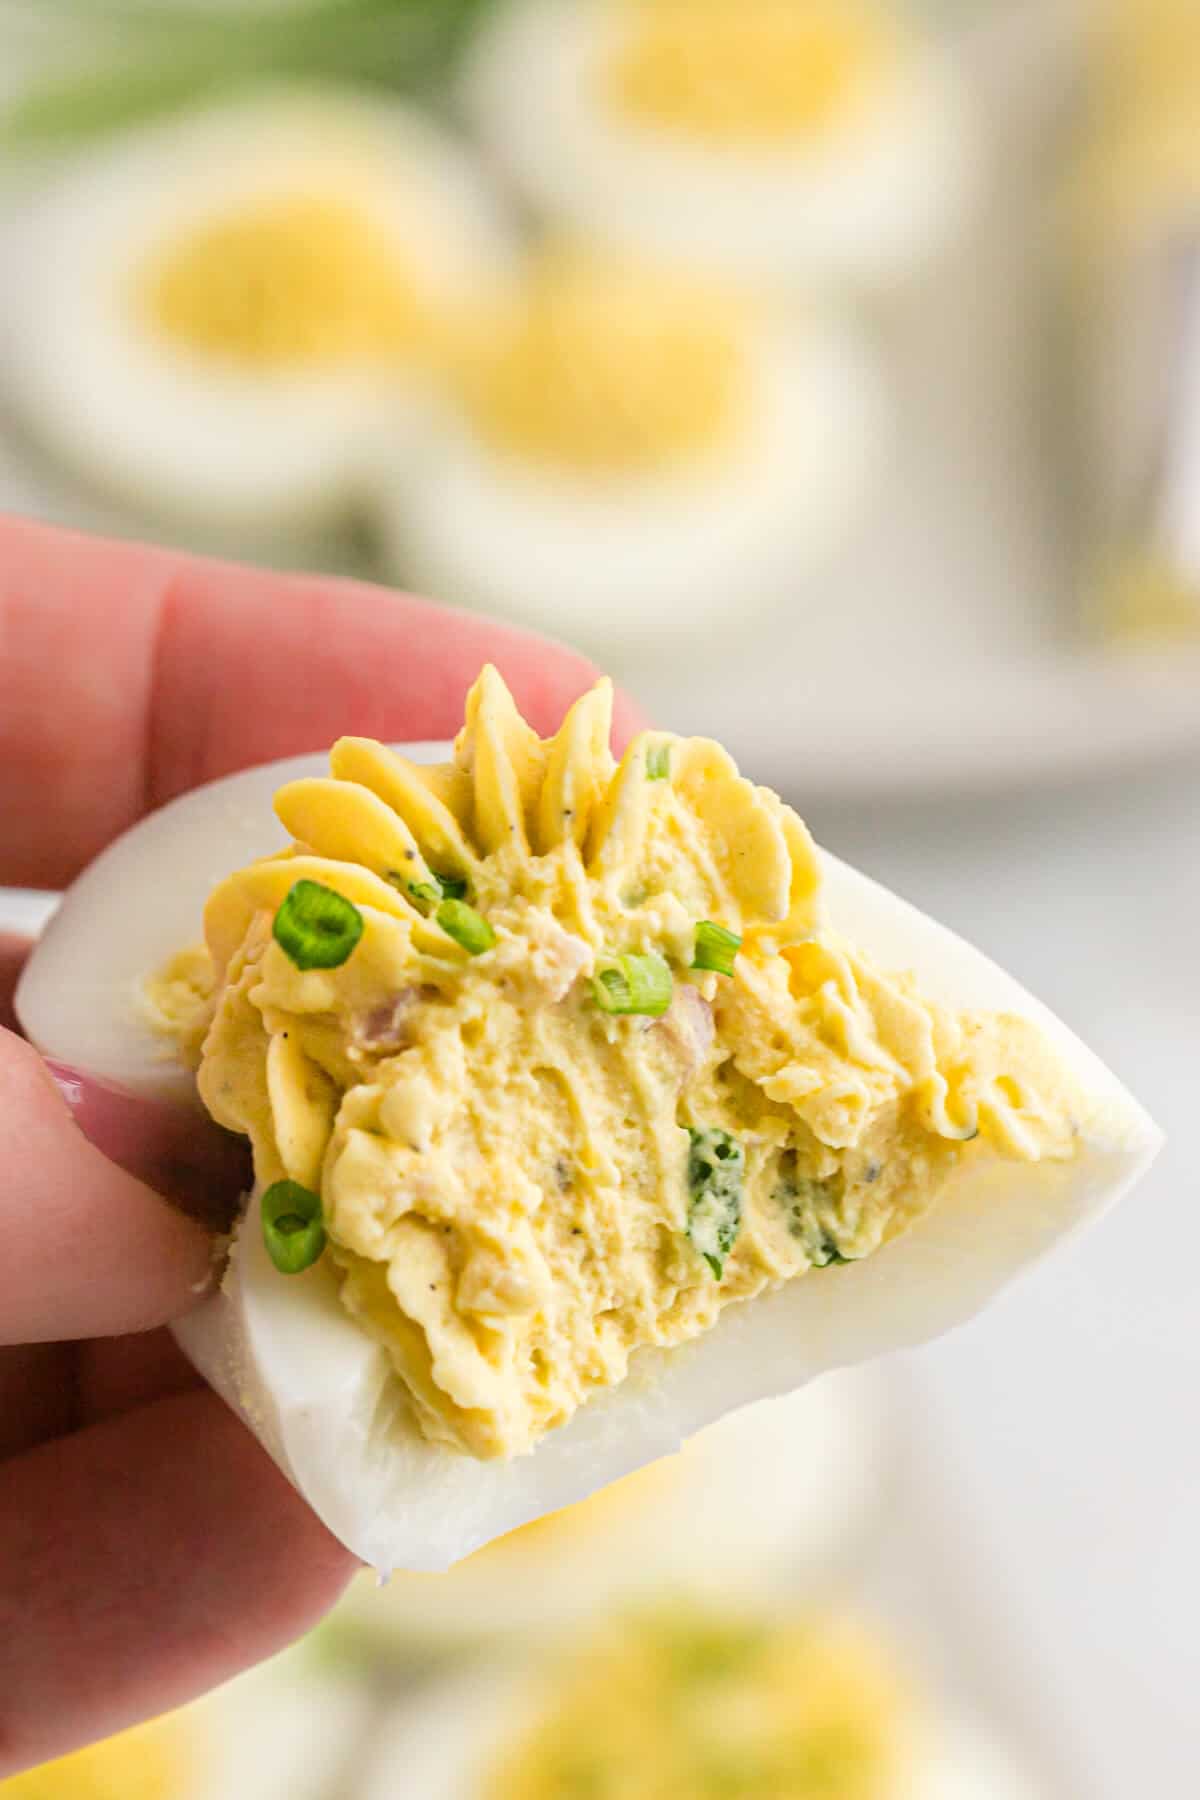 A hand holding a Devilish egg with a bite out of it.